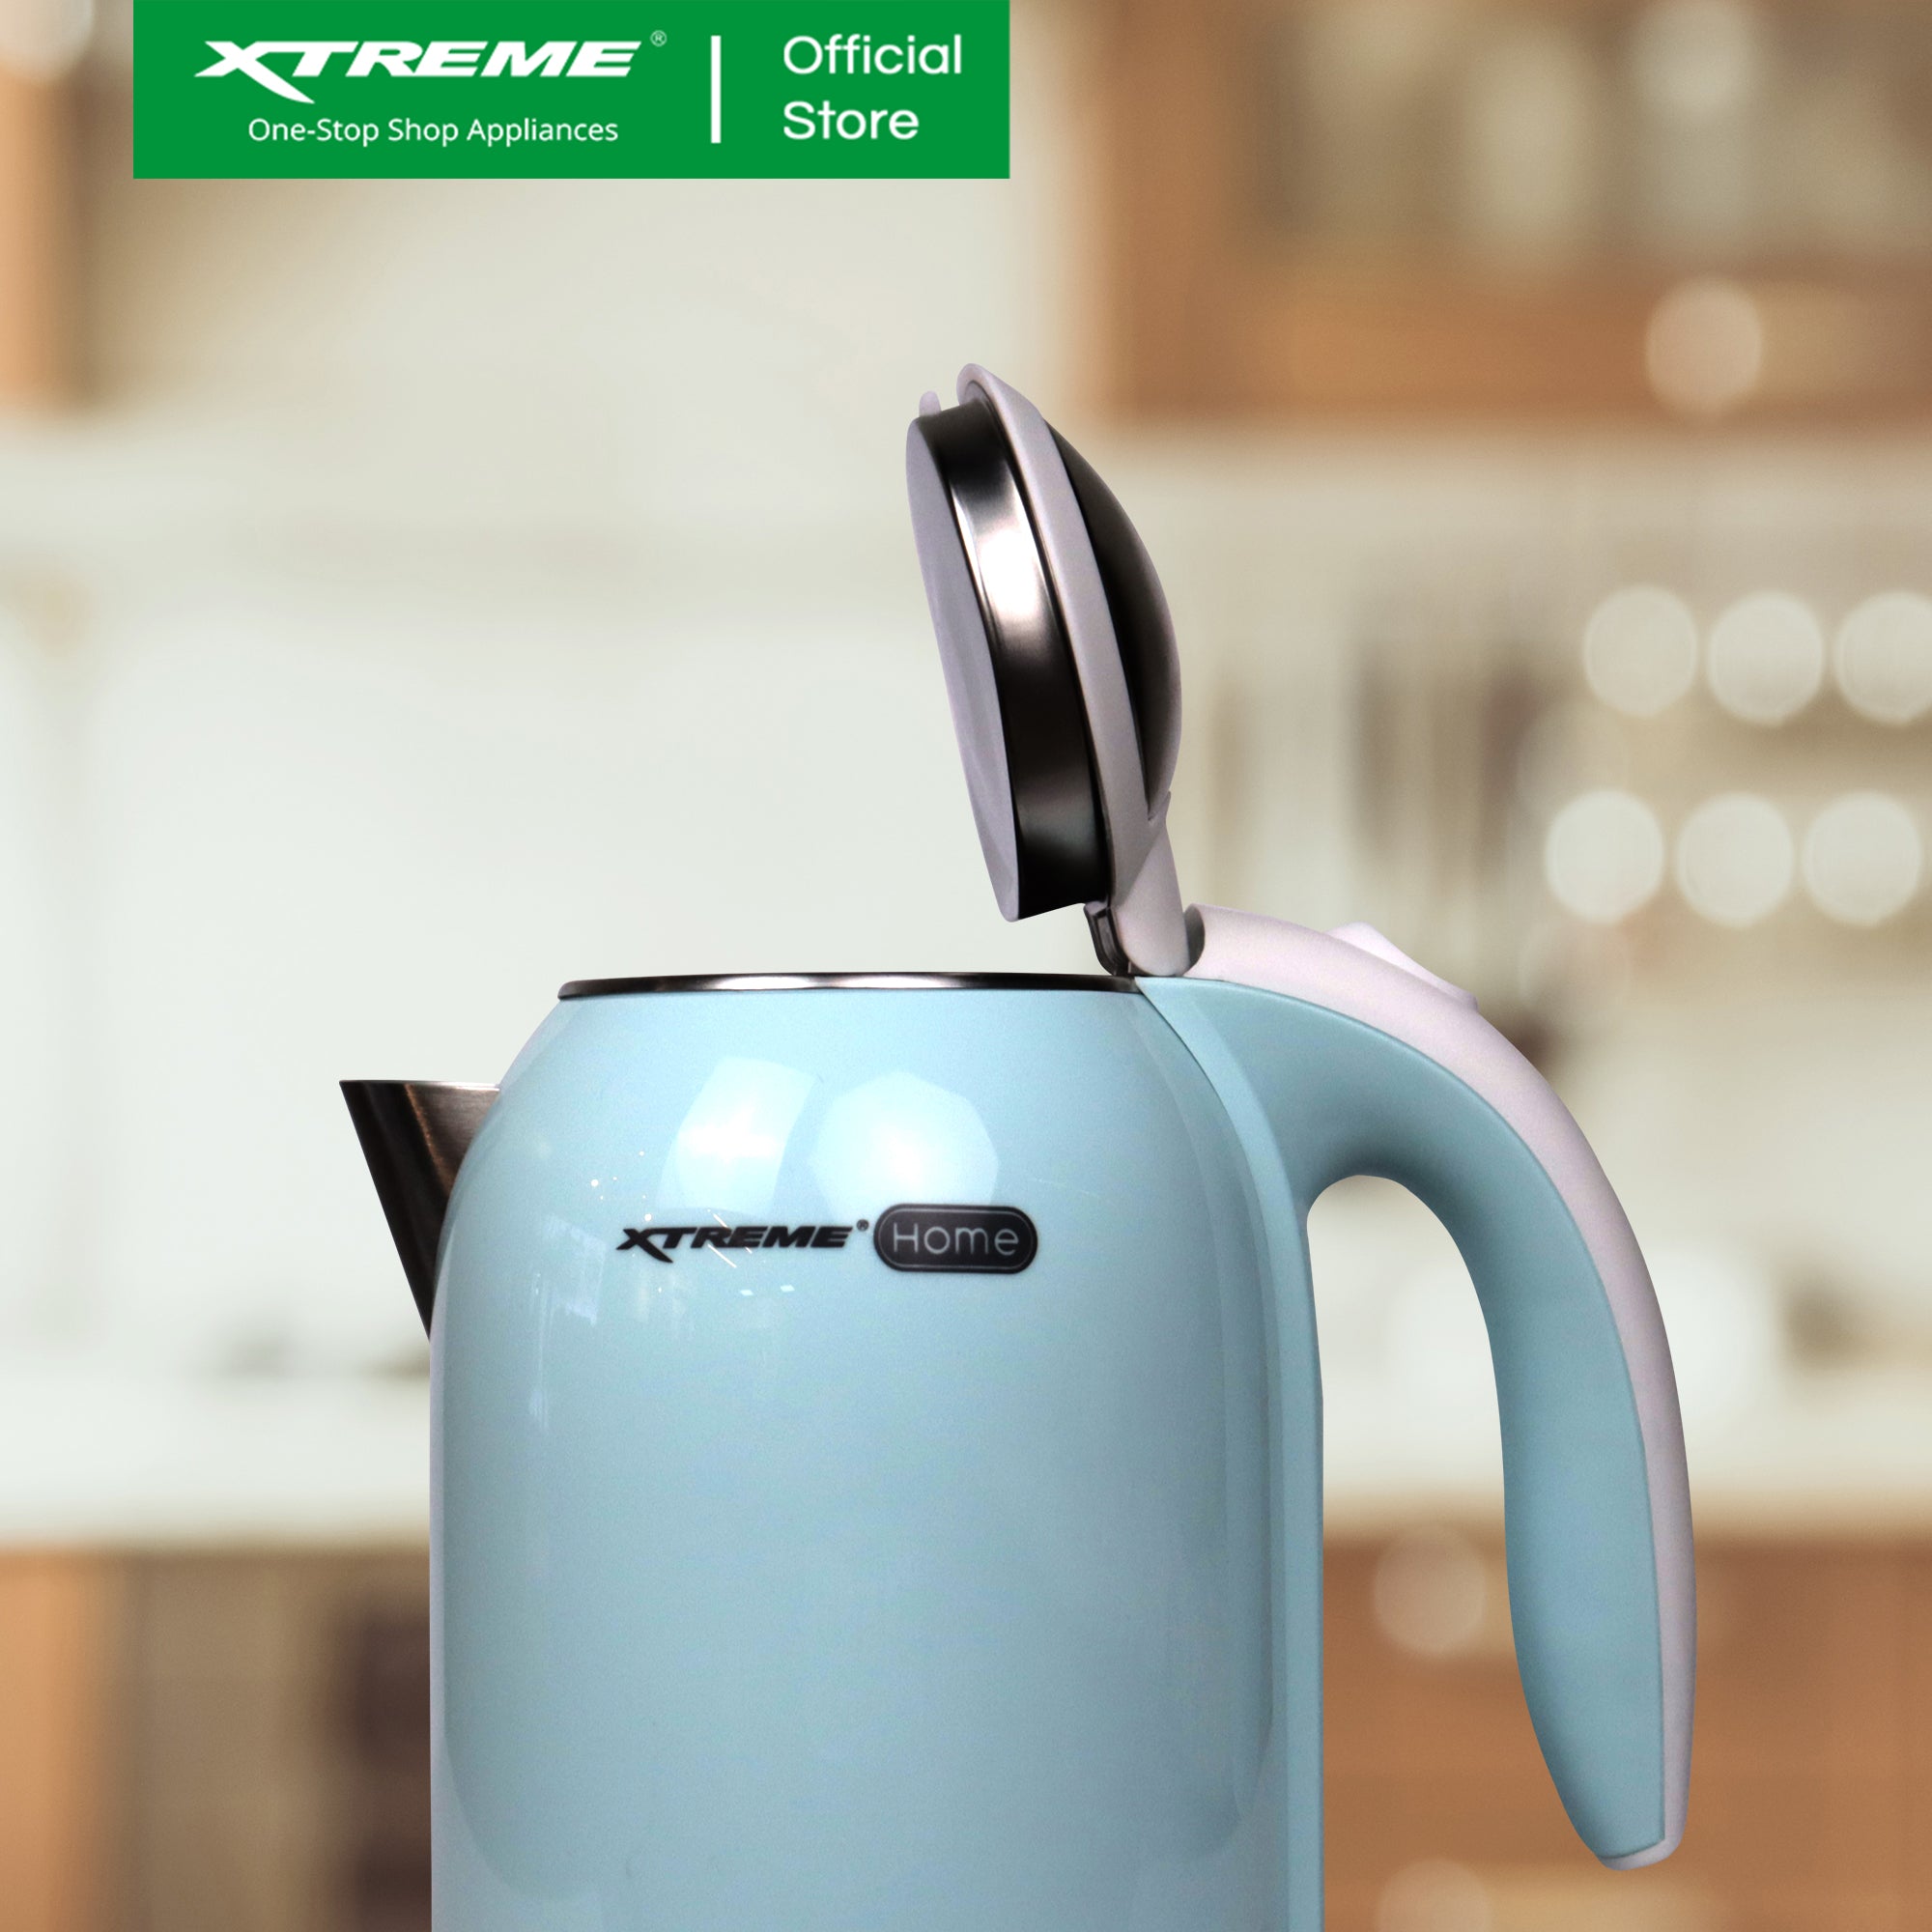 X-SERIES 1.7L Electric Kettle Cordless with Automatic Power-off (Blue) | XH-KT-DWOPH17BLUEX